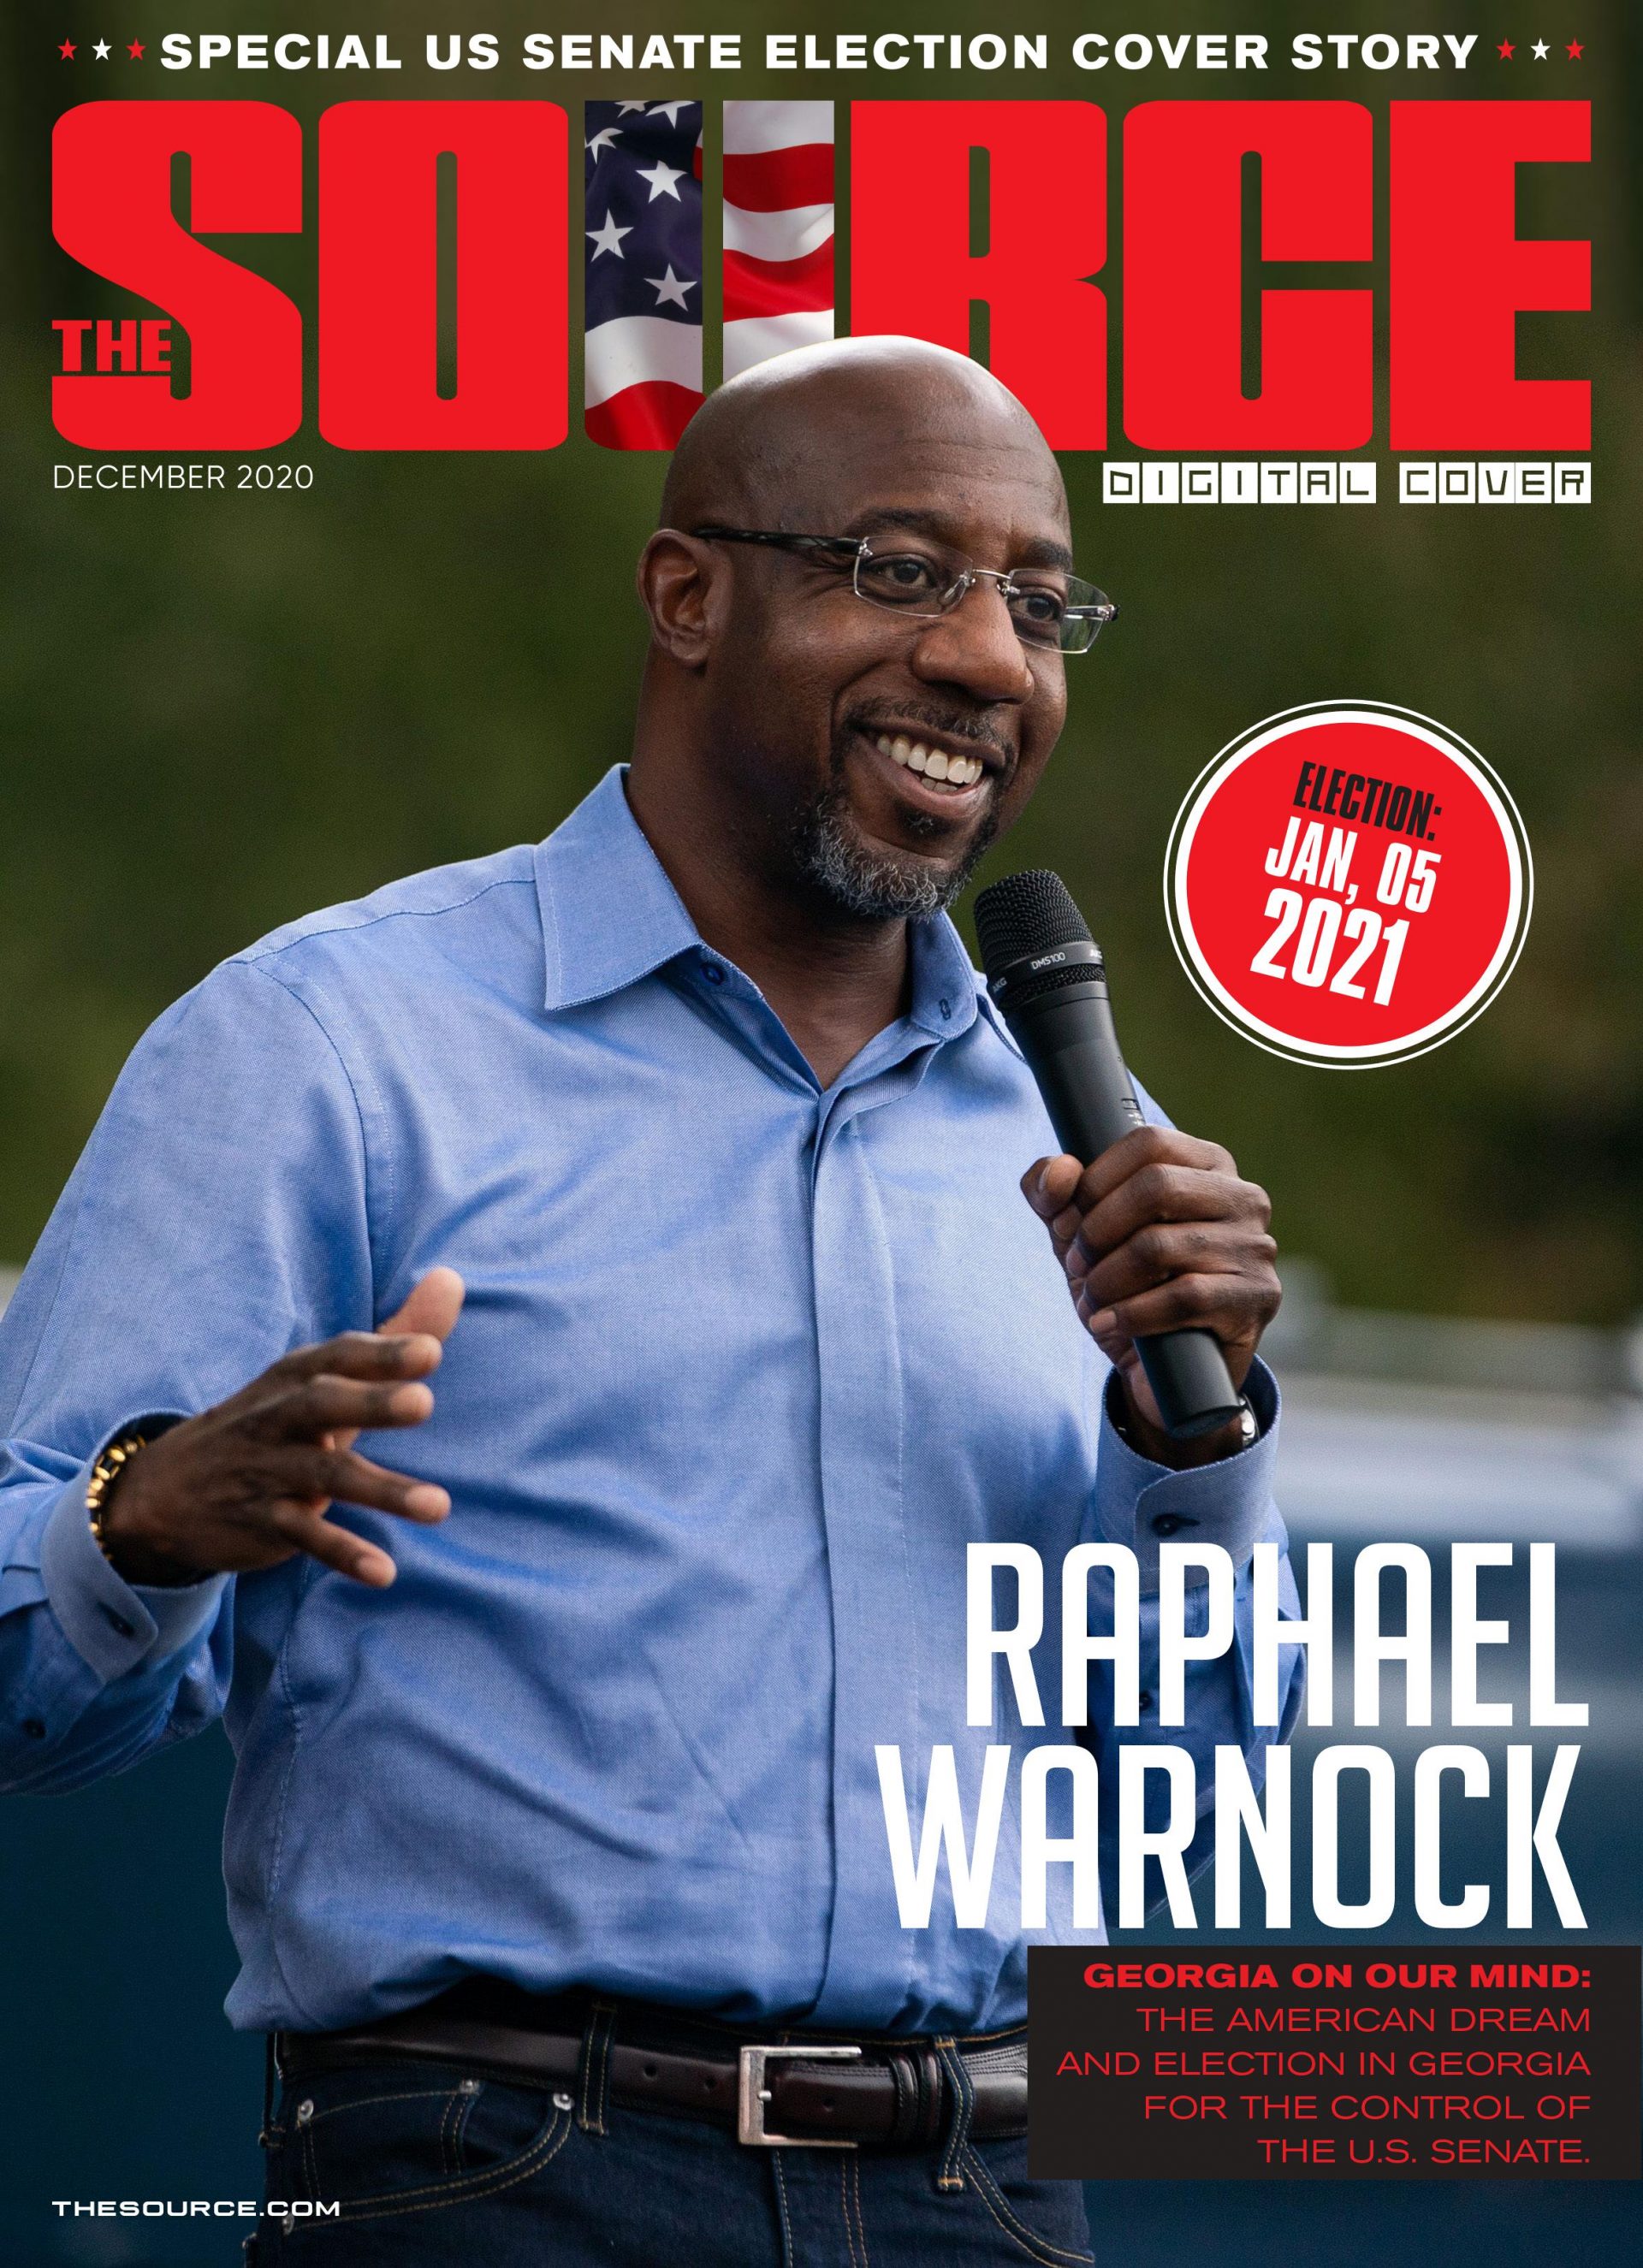 raphael warnock committee assignments